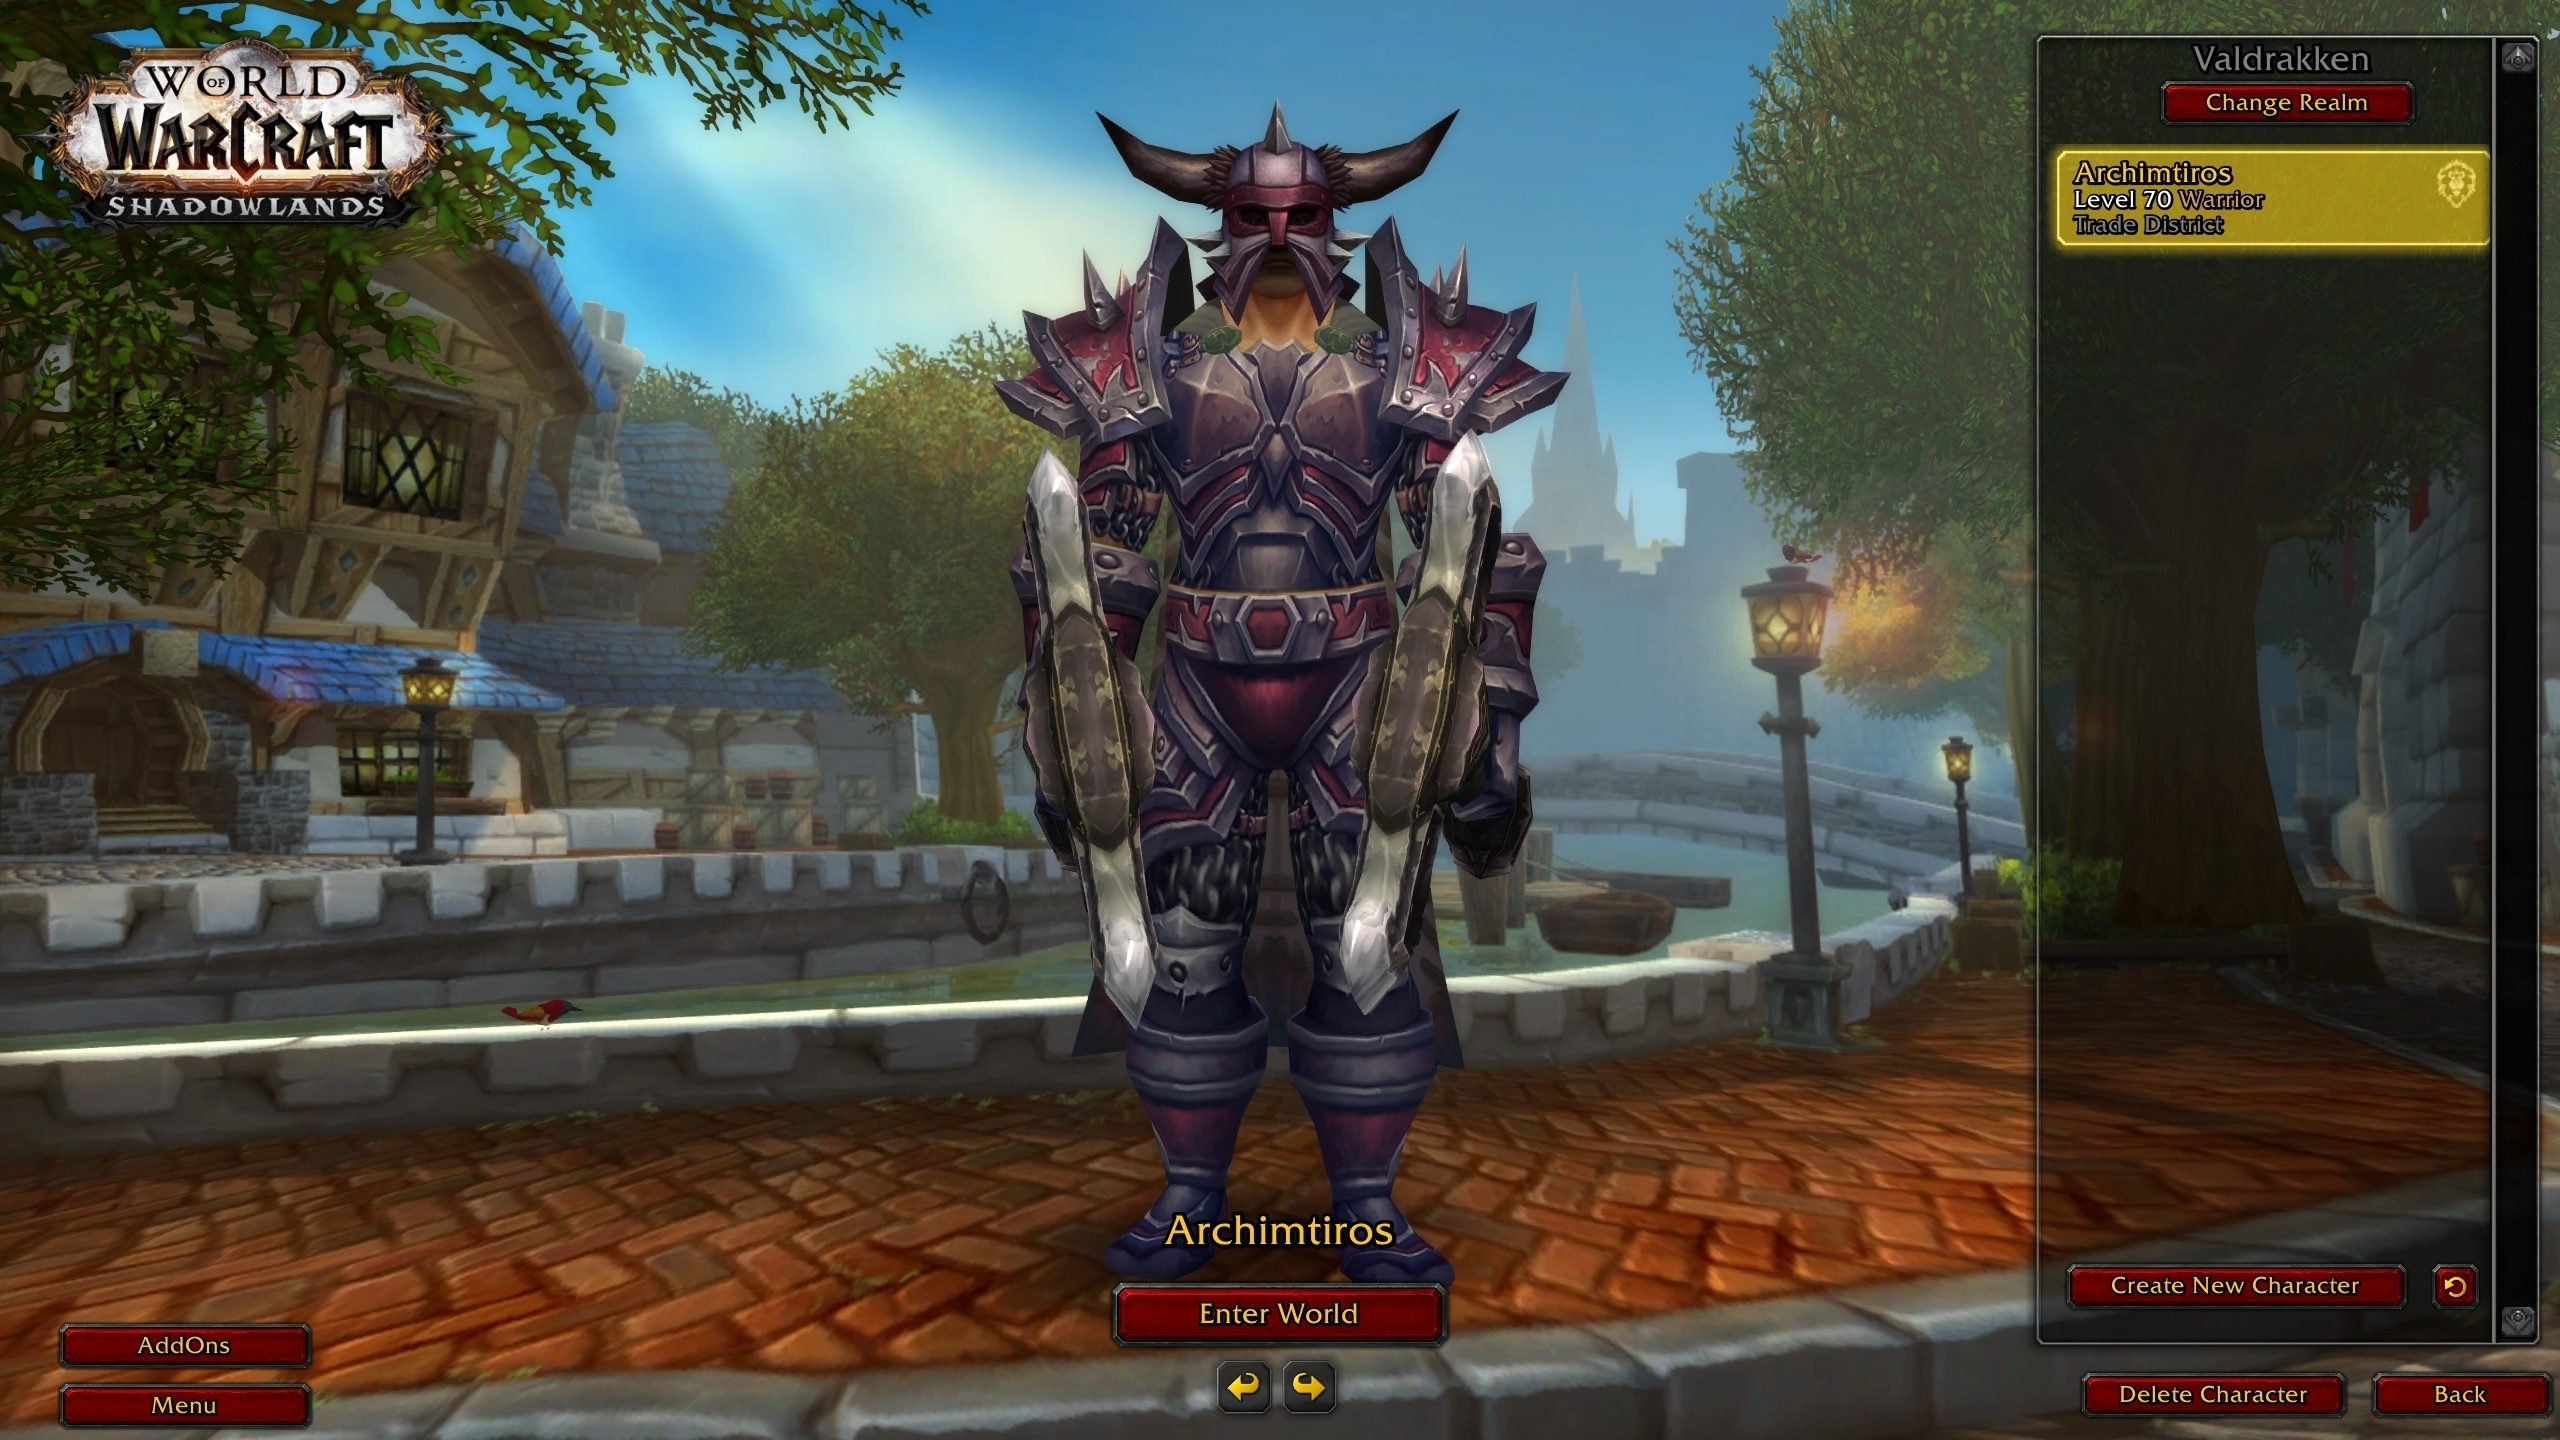 Level 70 Premade Characters Now Available for Testing on the